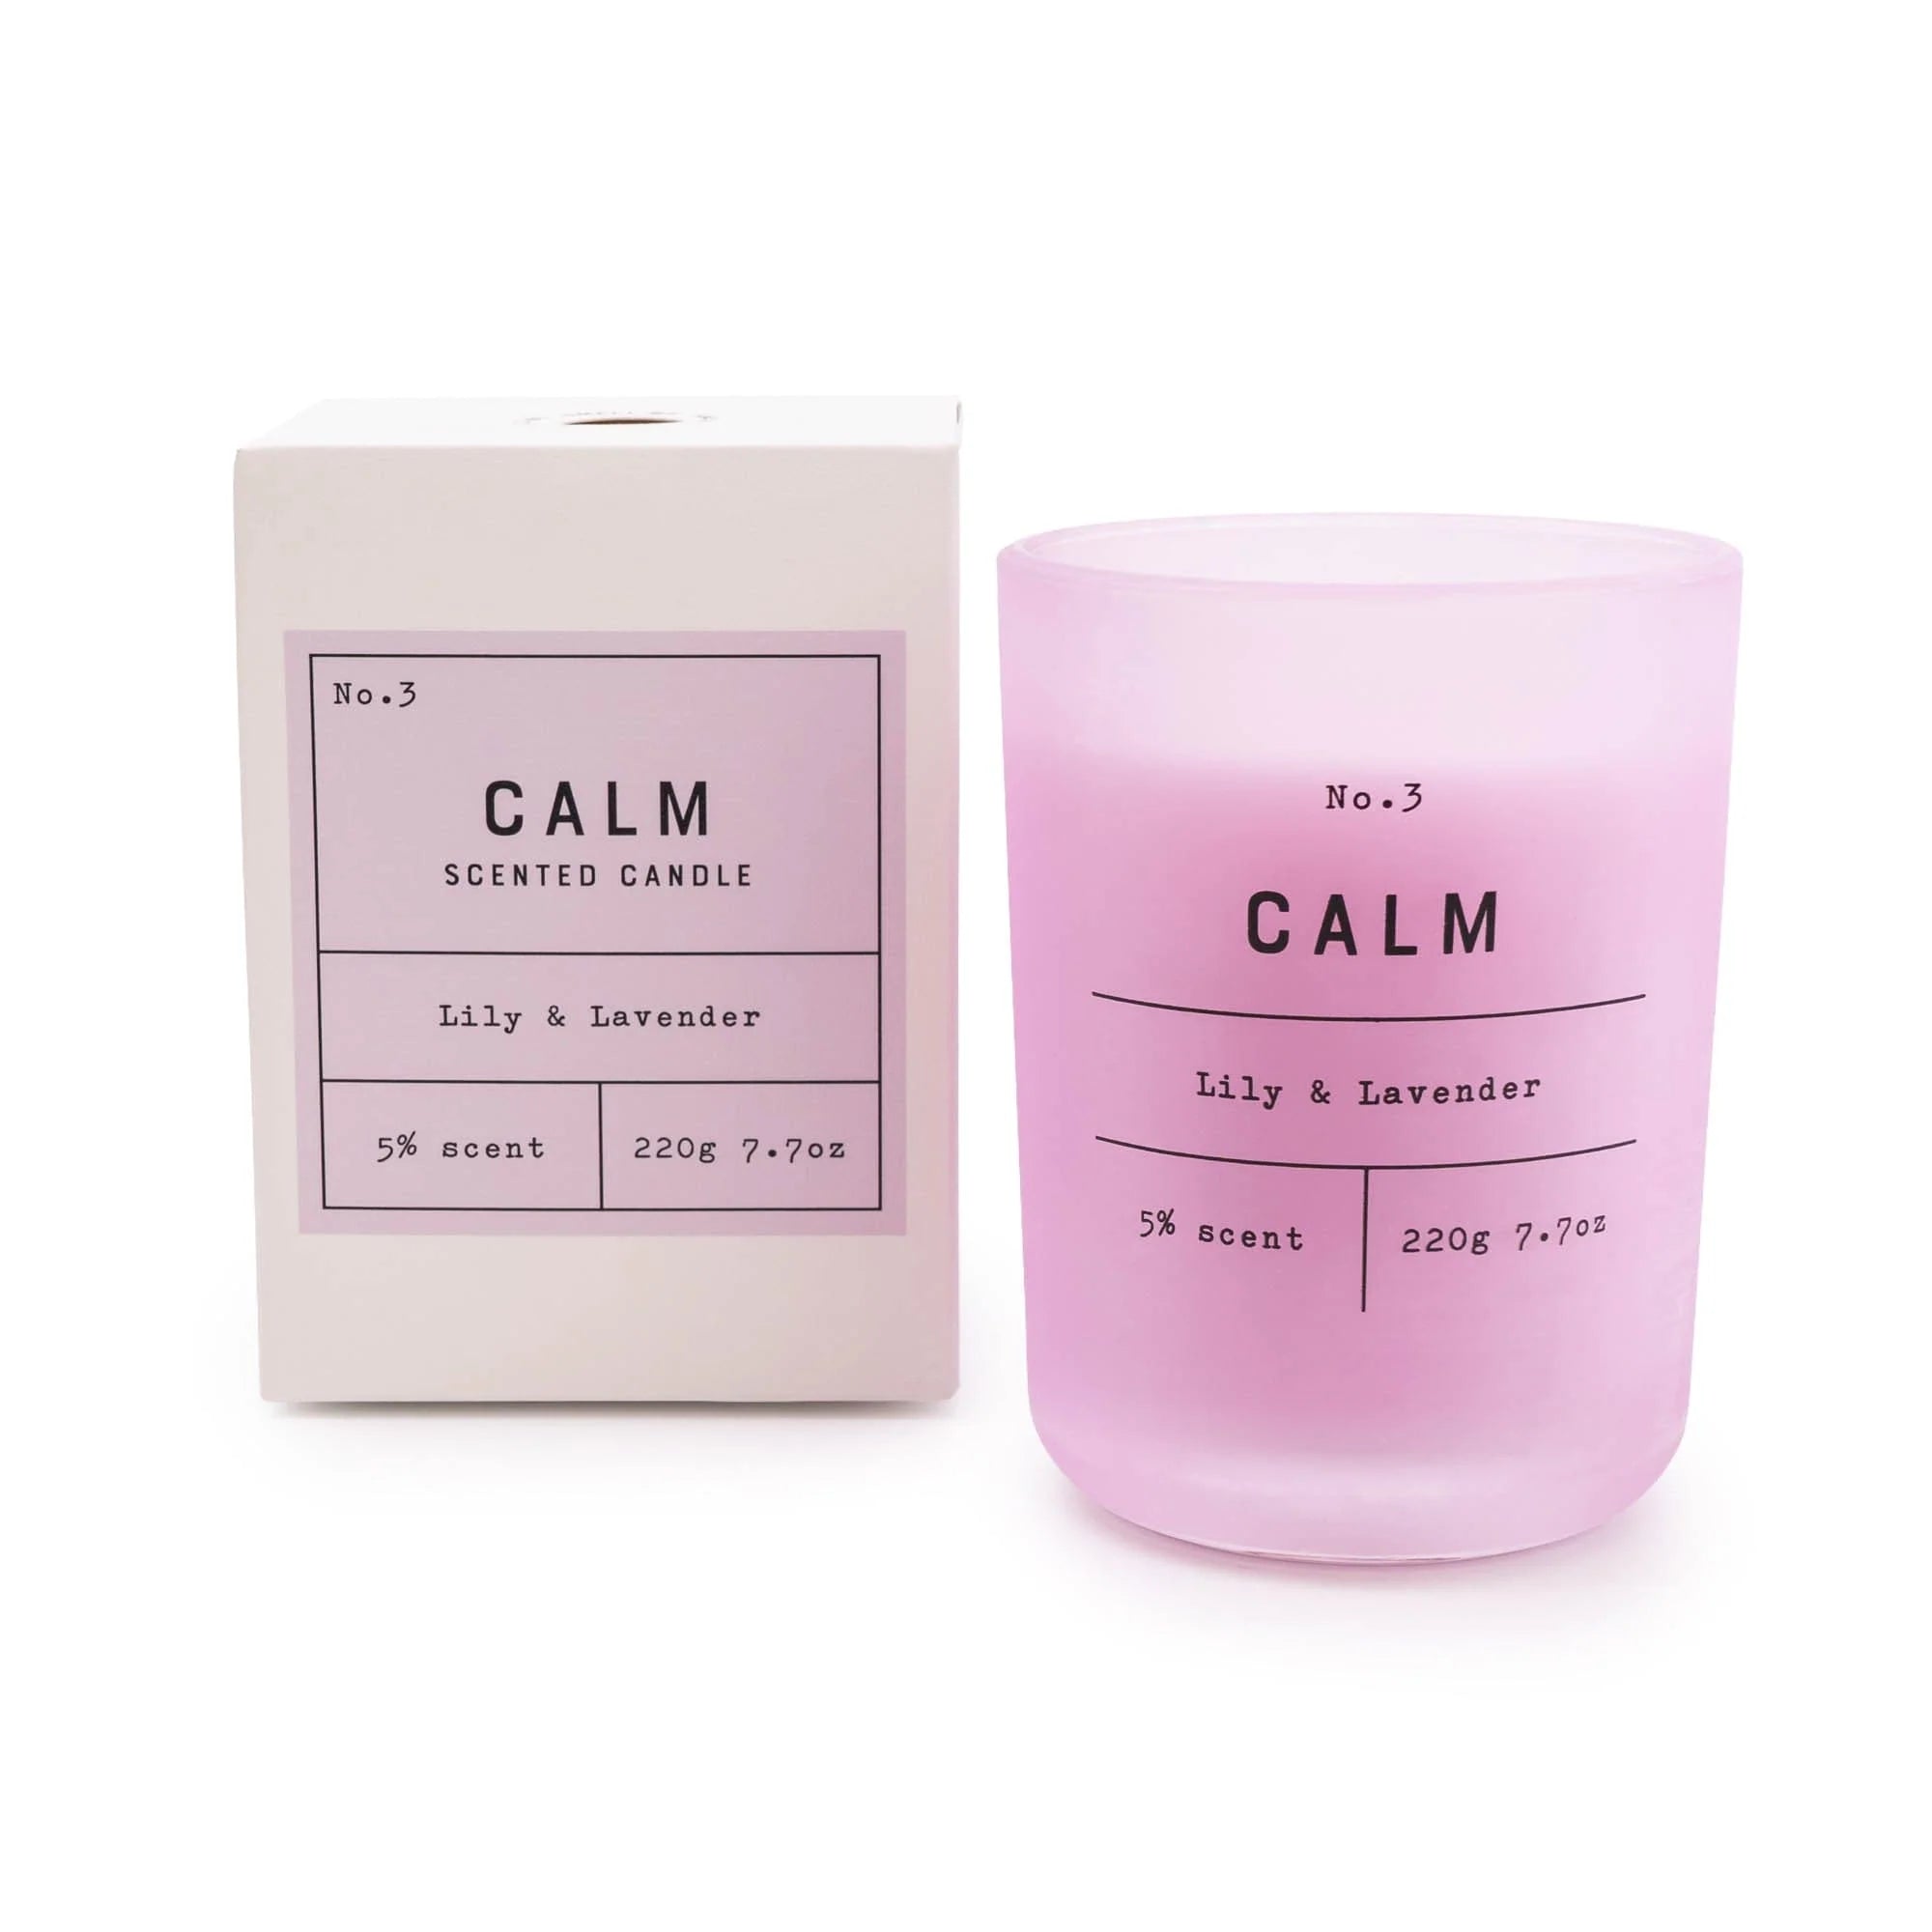 A light pink glass candle &#39;calm&#39; with a lily and lavender scent